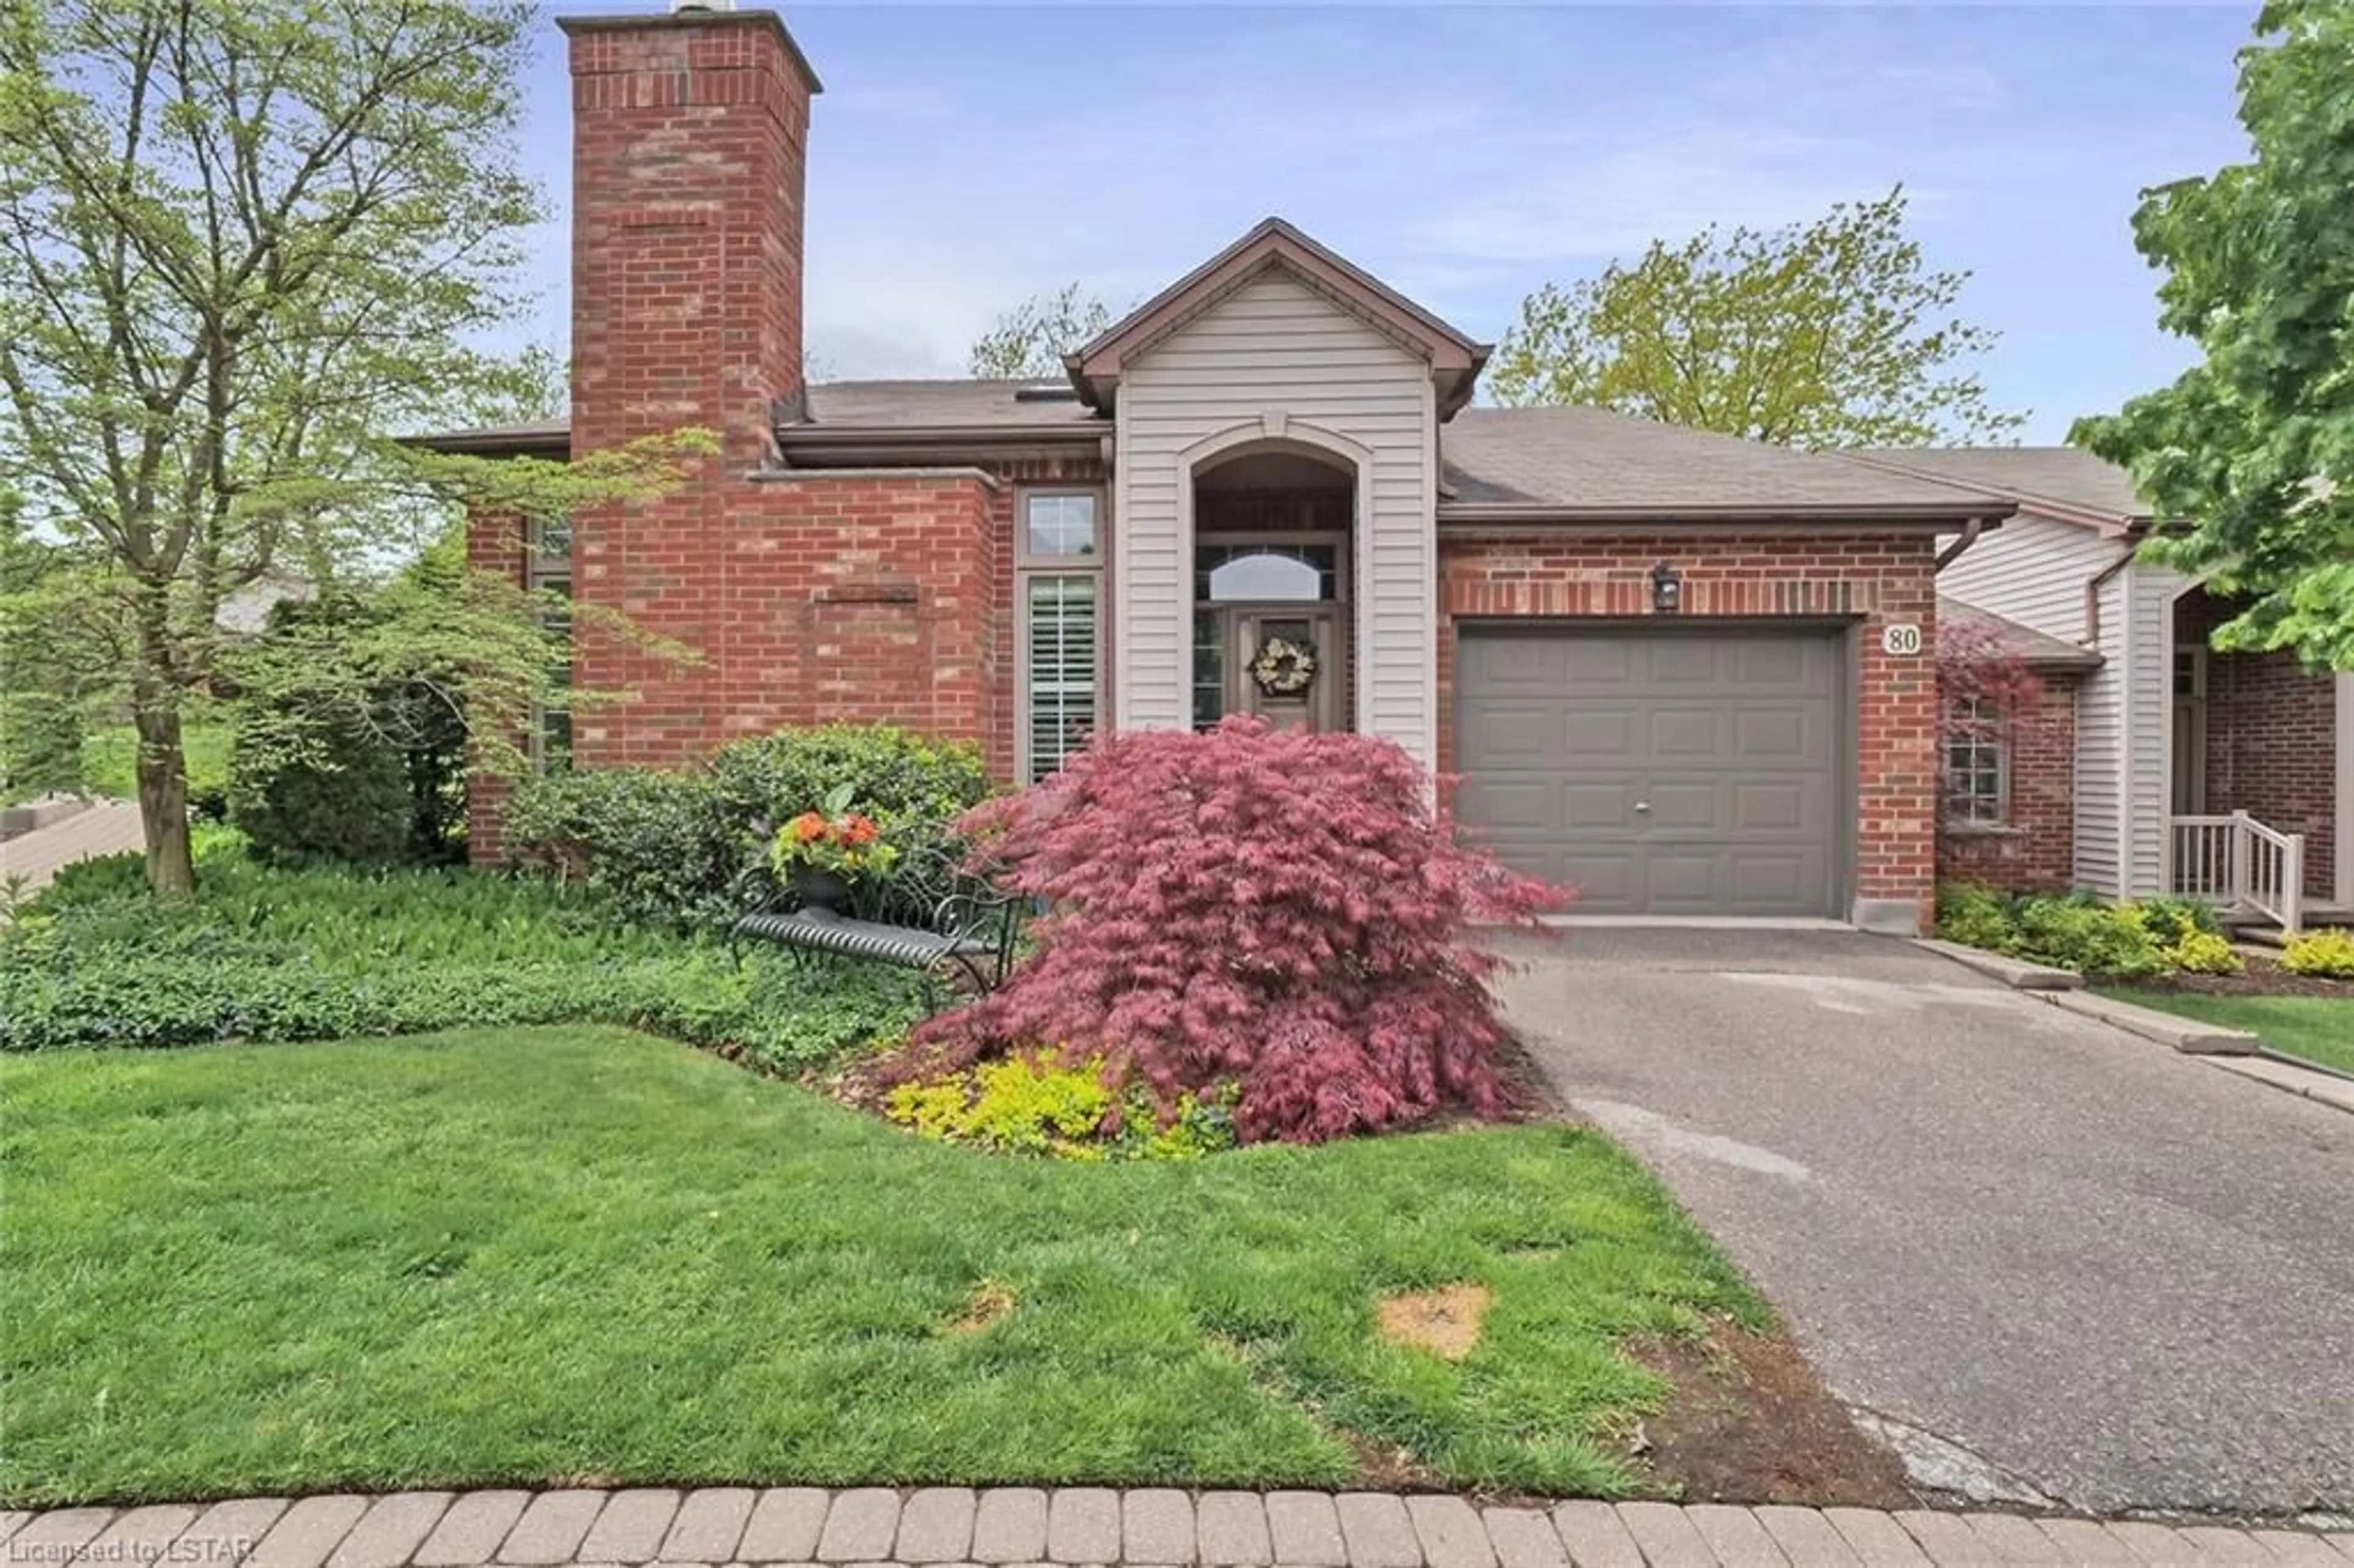 Home with brick exterior material for 1100 Byron Baseline Rd #80, London Ontario N6K 4M3